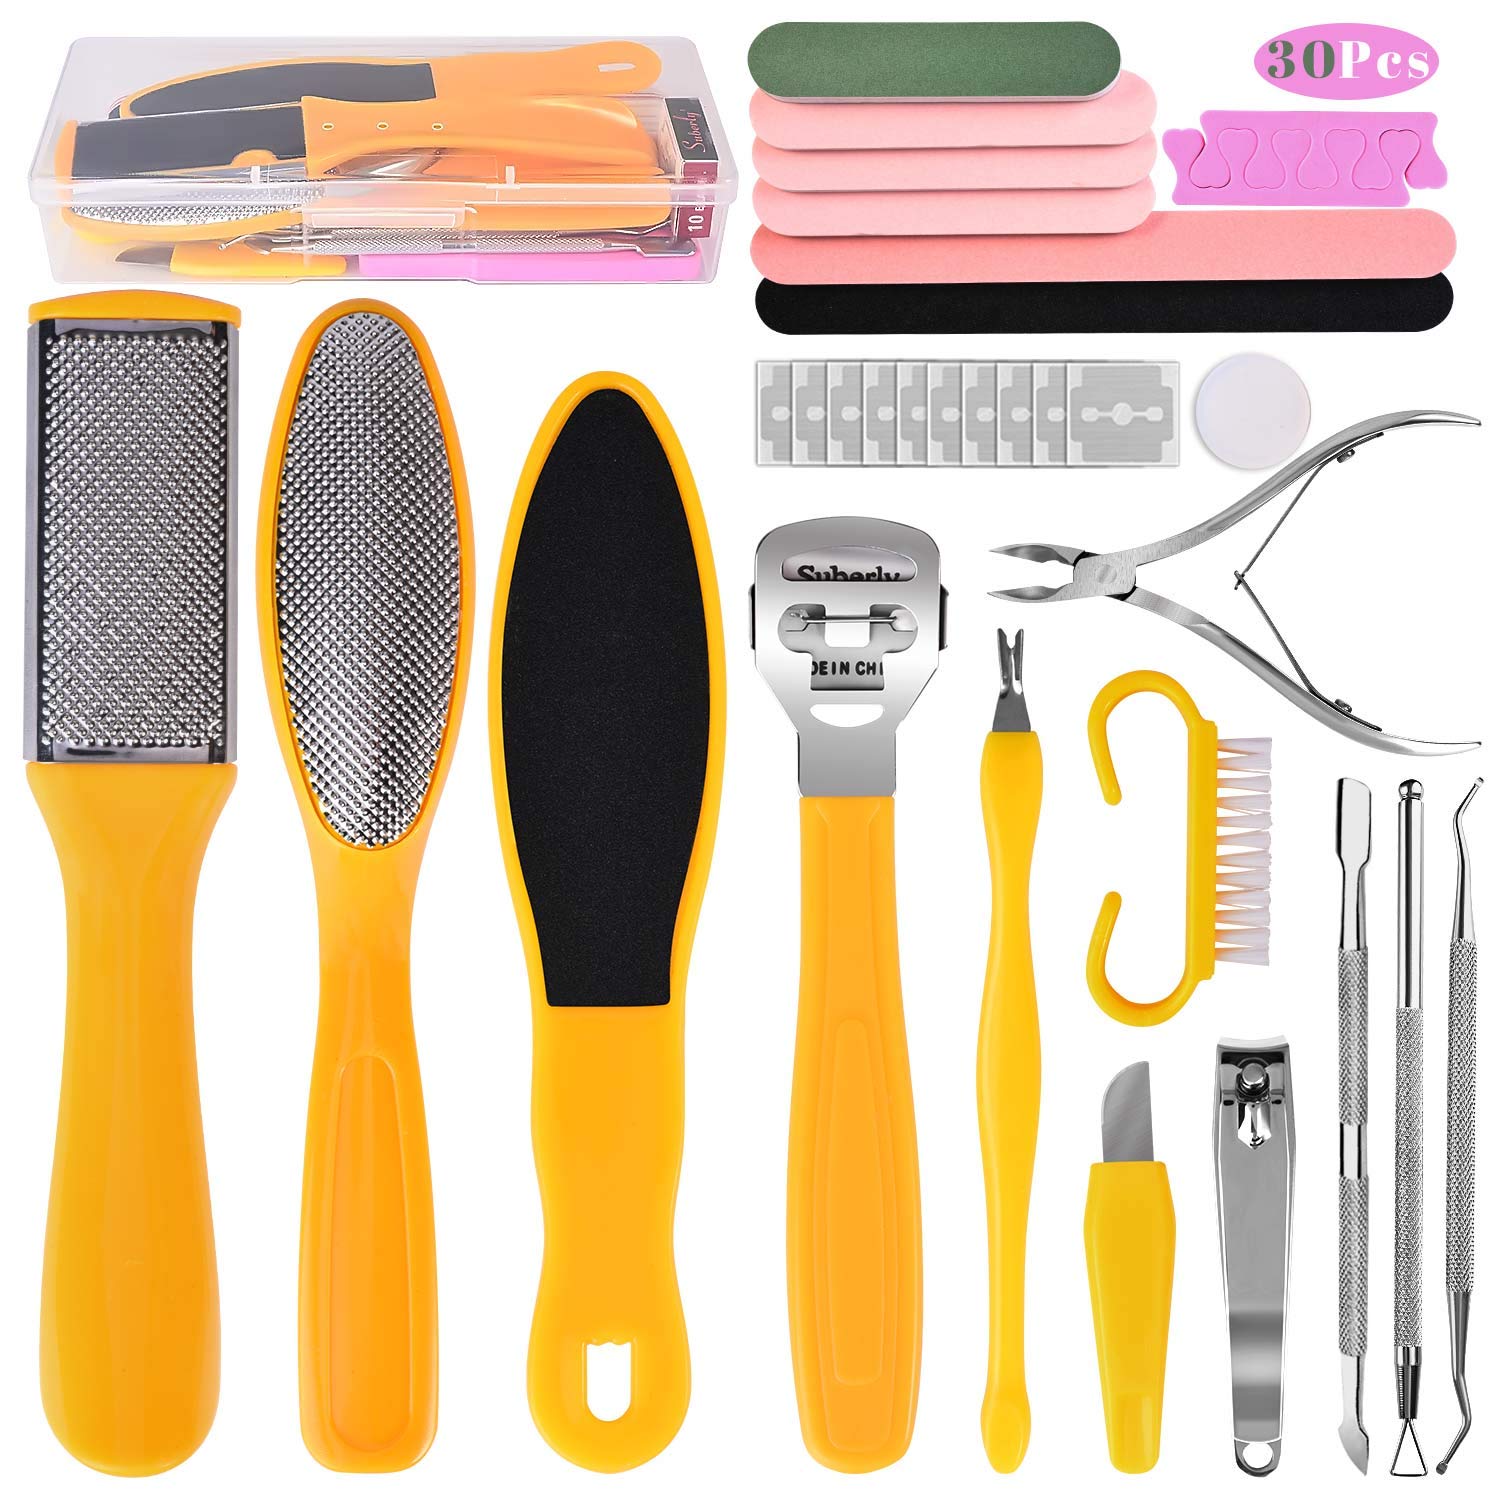 Foot File Pedicure Set, 30 in 1 Foot Files Foot Care Scrubber Kit Hard Skin Remover Feet Scrub for Women Men Salon or Home